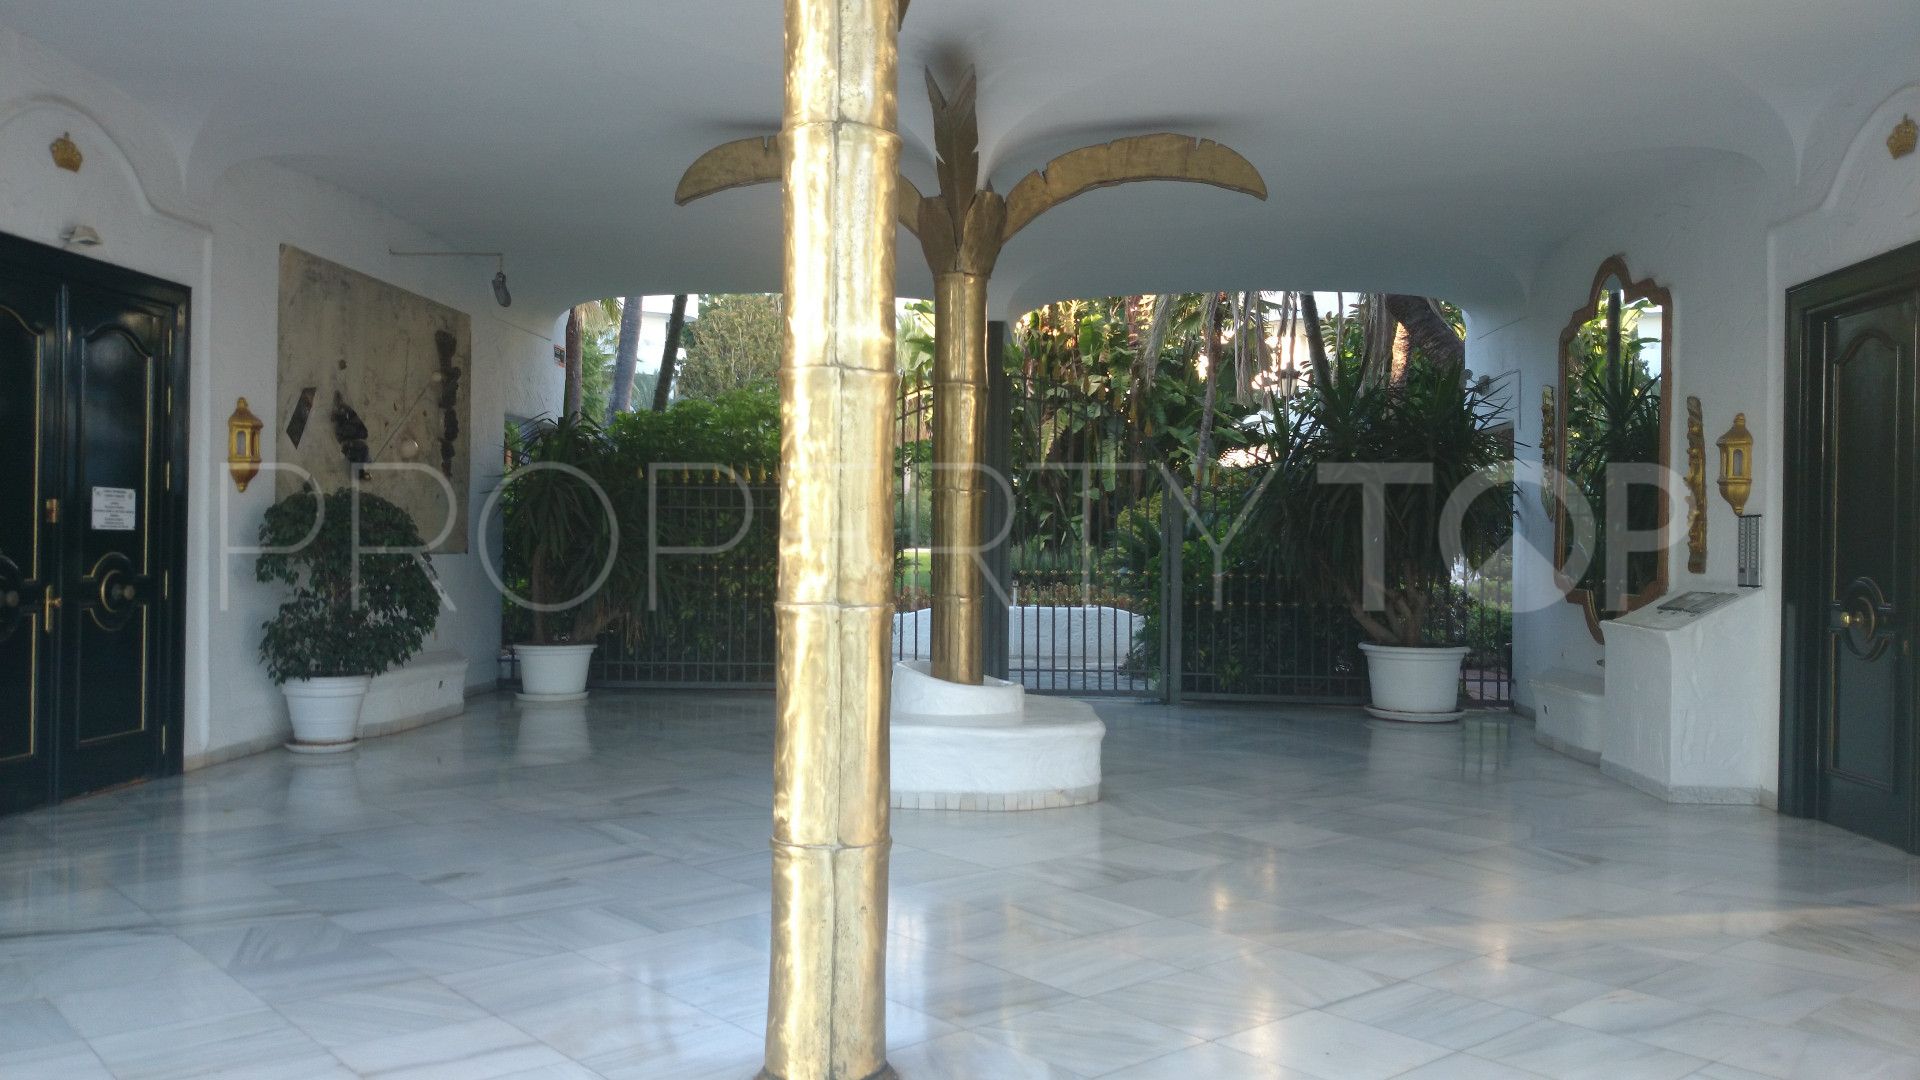 For sale Marbella Real duplex penthouse